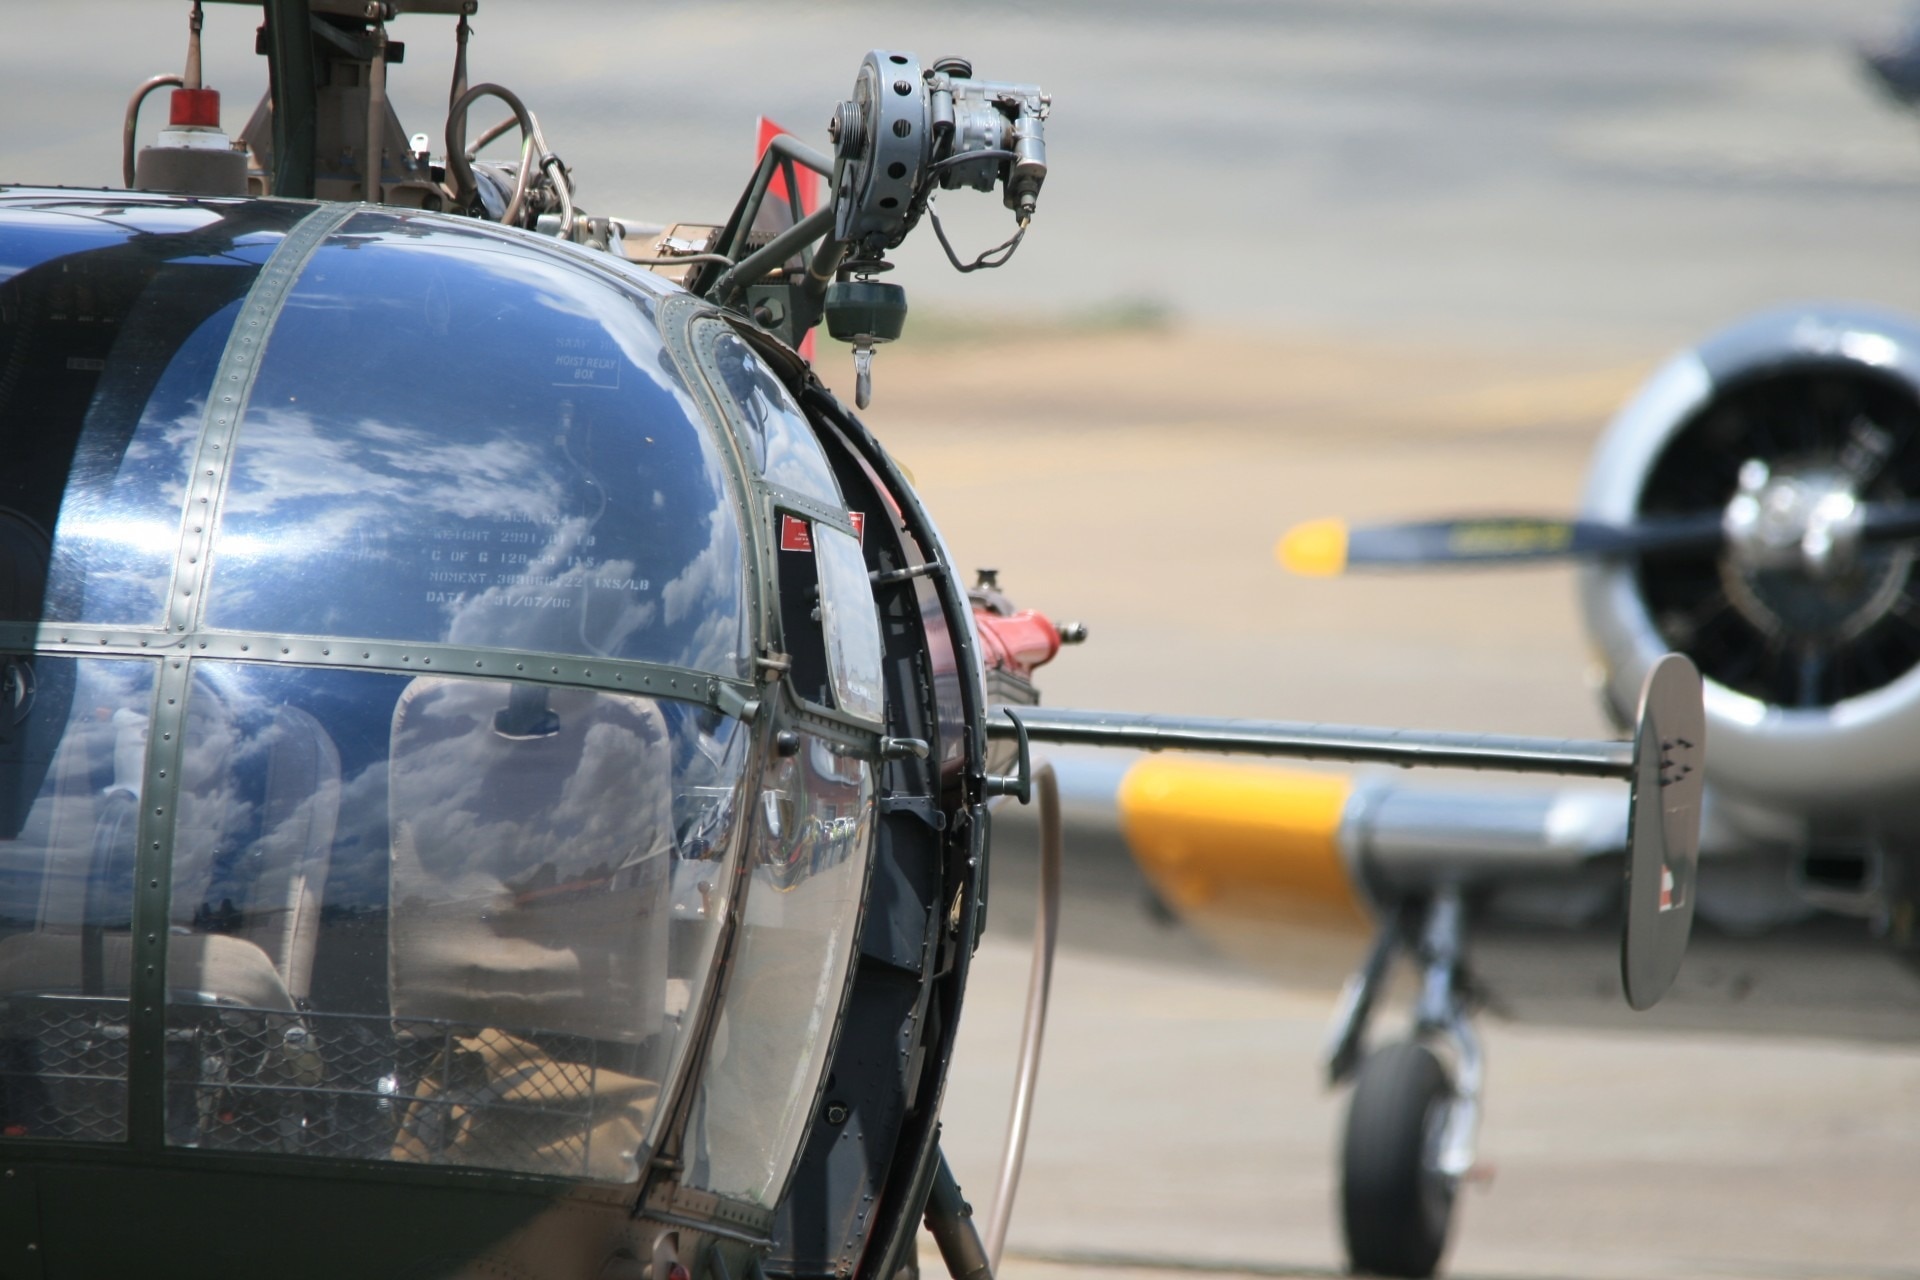 Helicopter, Windows, Alouette Iii, airplane, air vehicle